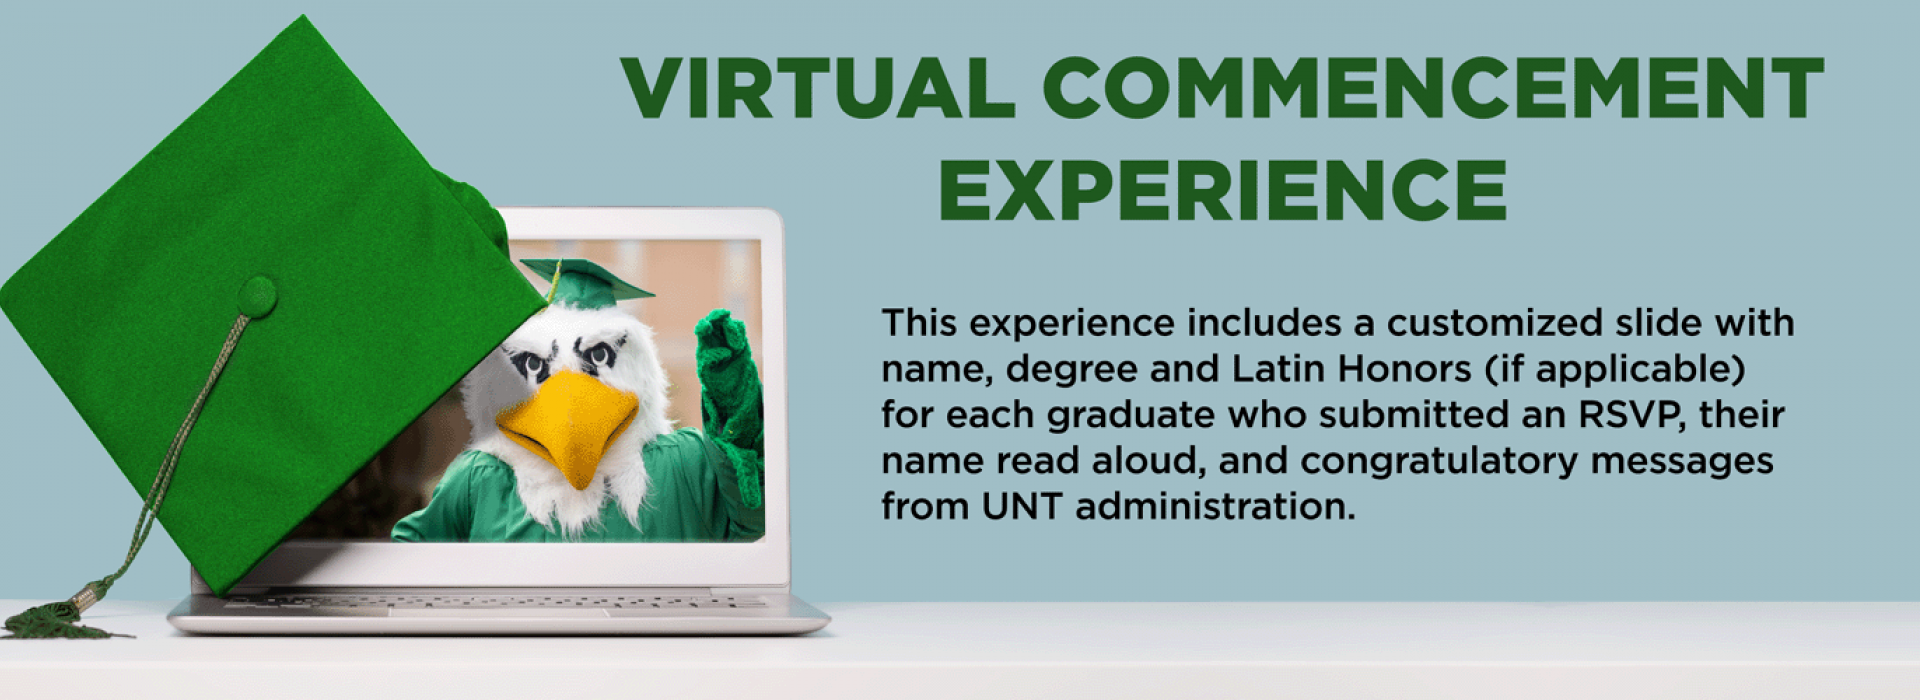 UNT Virtual Commencement Experience, Learn More.